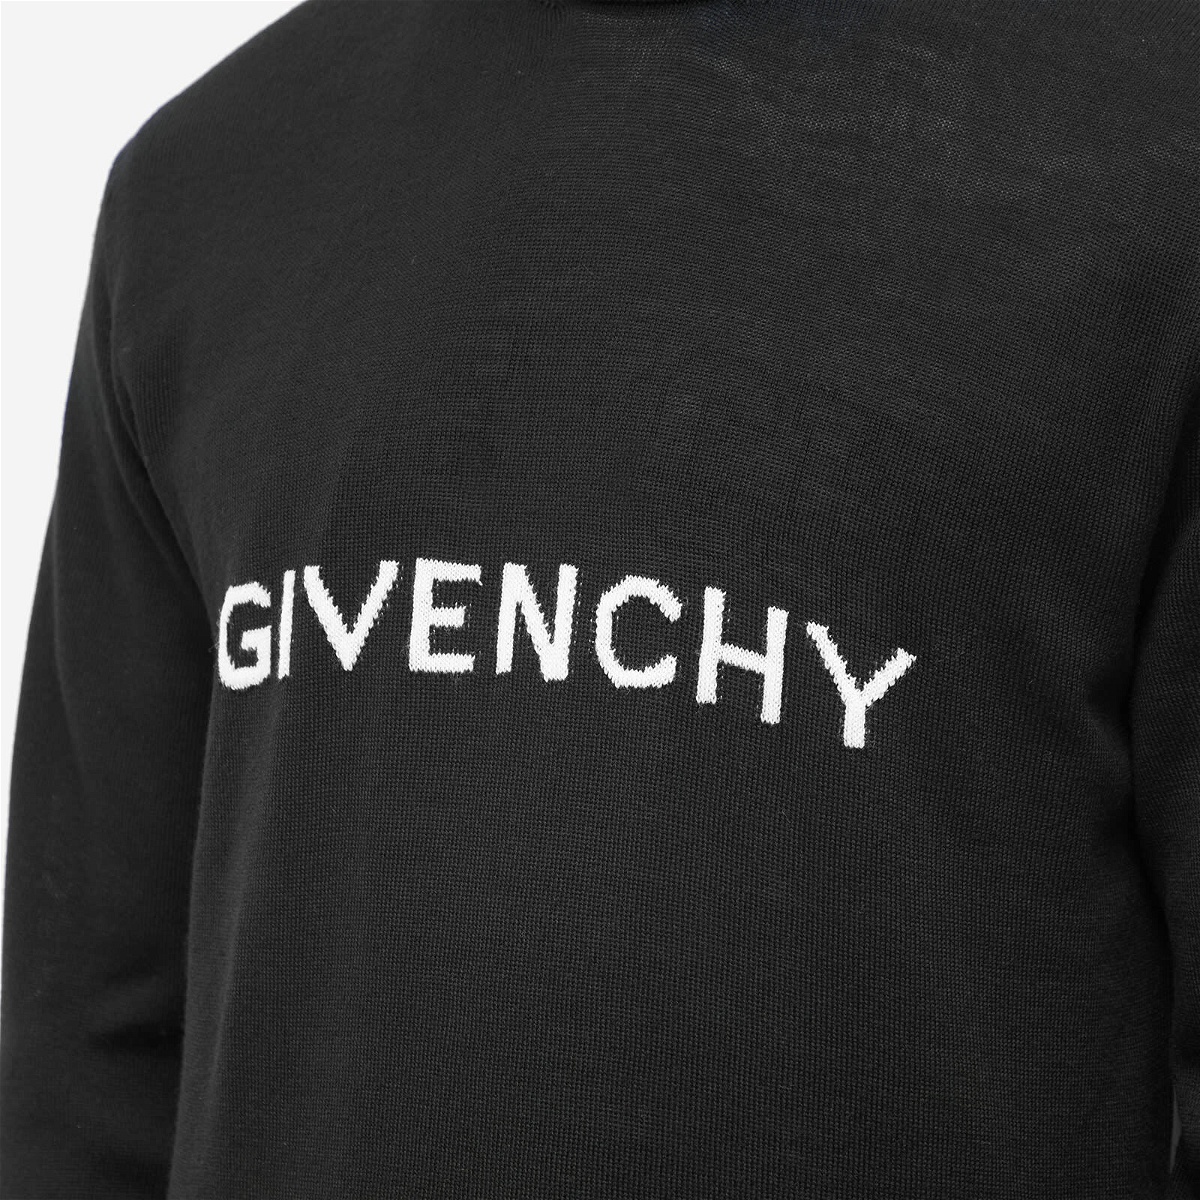 Givenchy Men's Archetype Logo Crew Knit in Black Givenchy